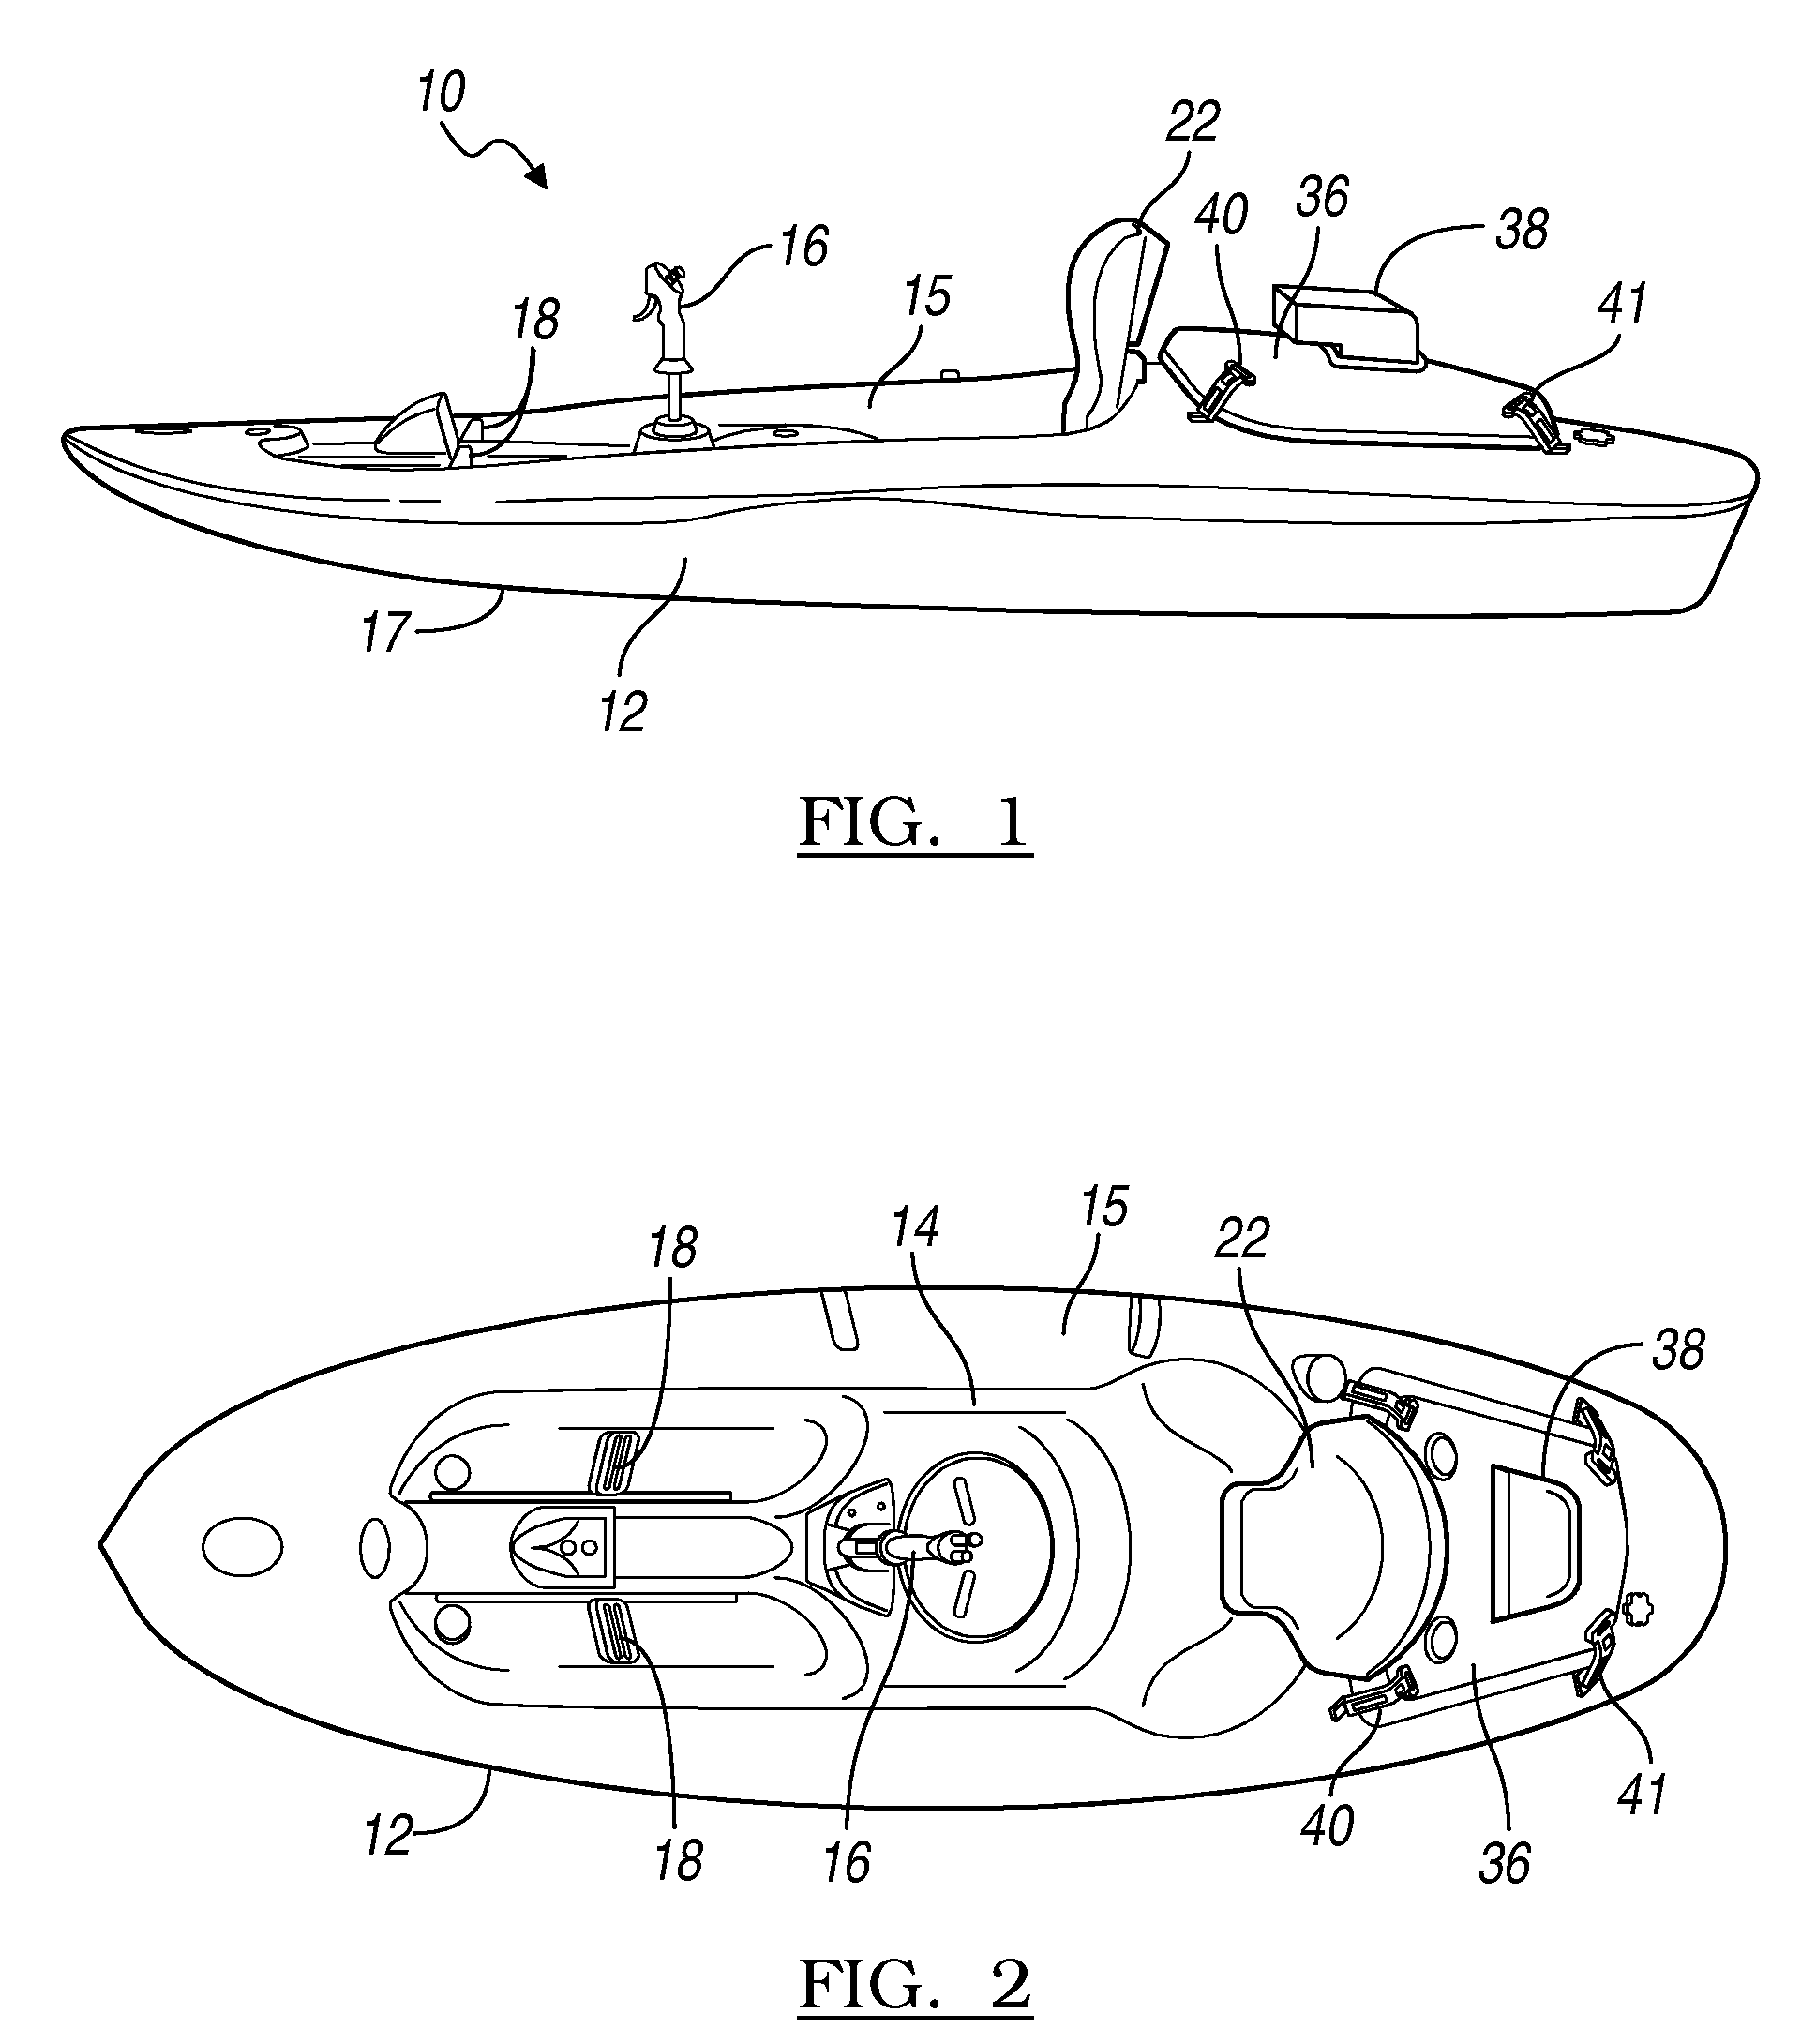 Watercraft Propelled By a Water Jet